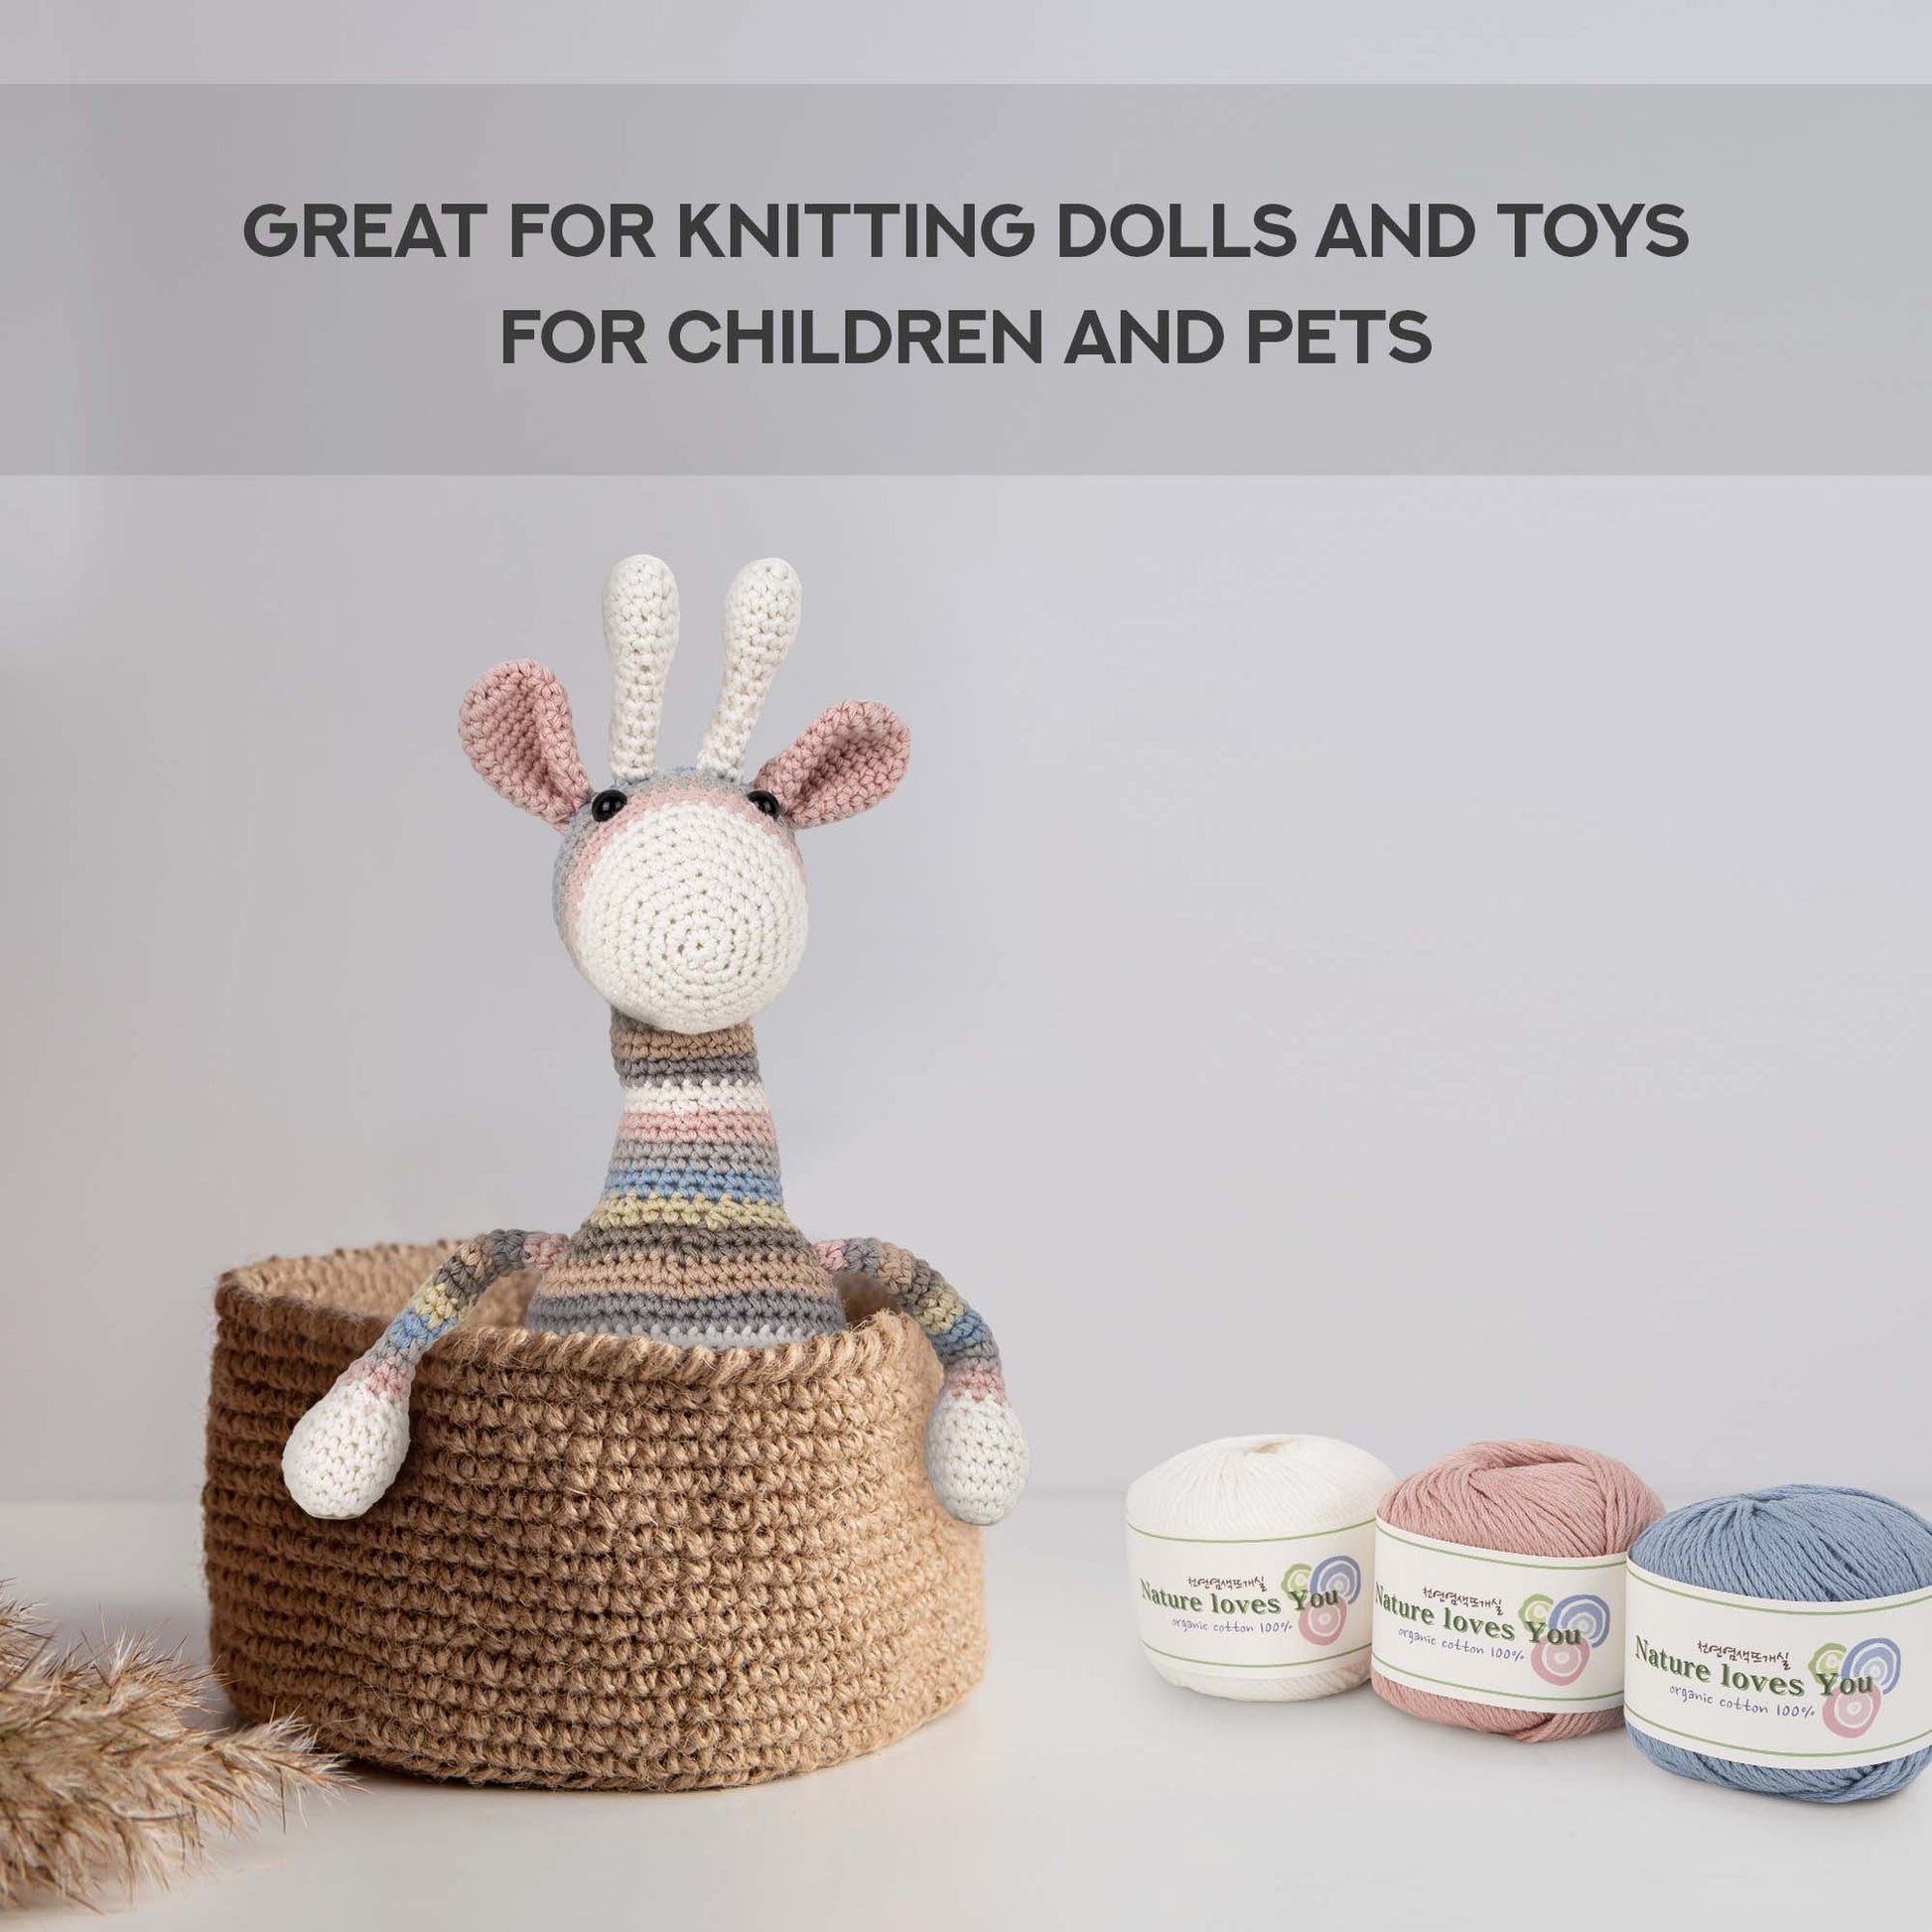 Great for knitting dolls and toys for baby, children and pets.